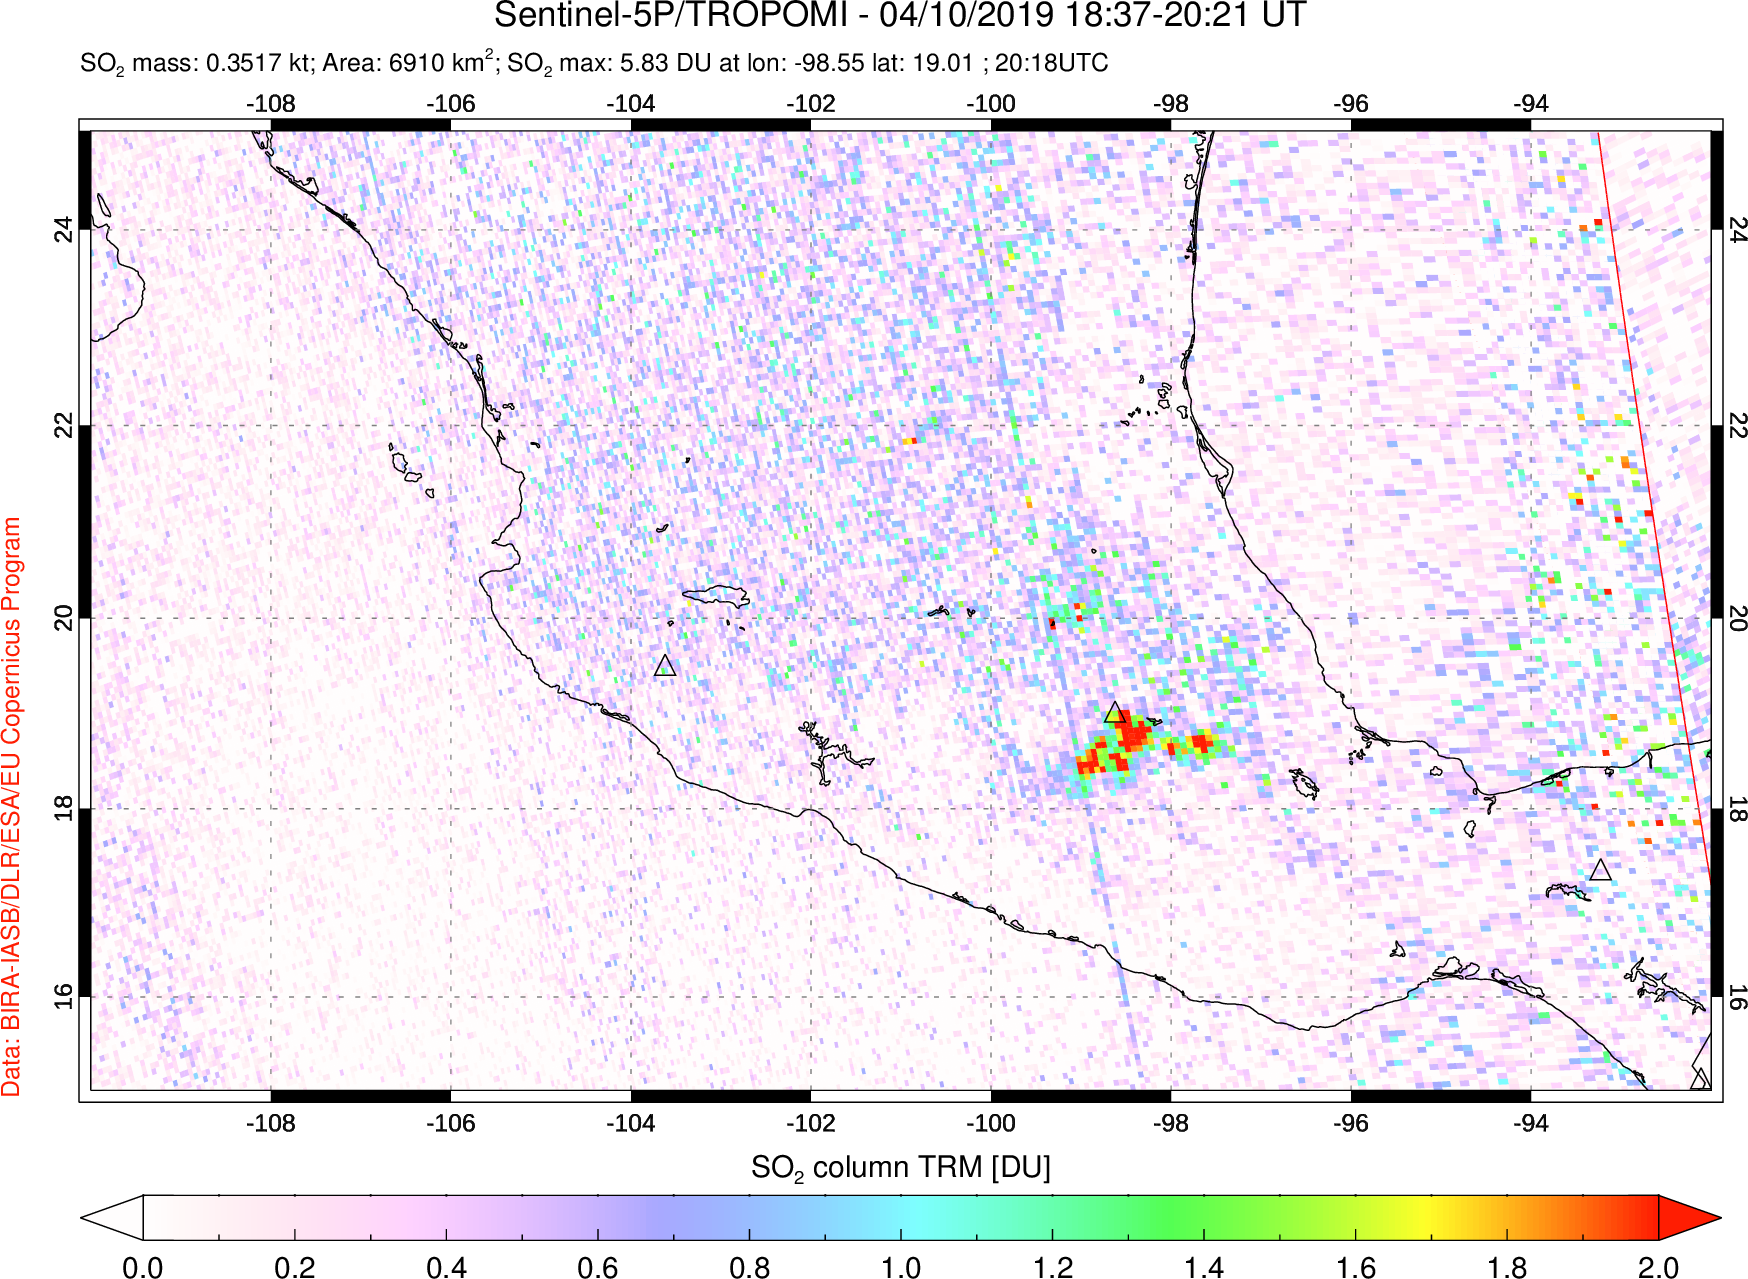 A sulfur dioxide image over Mexico on Apr 10, 2019.